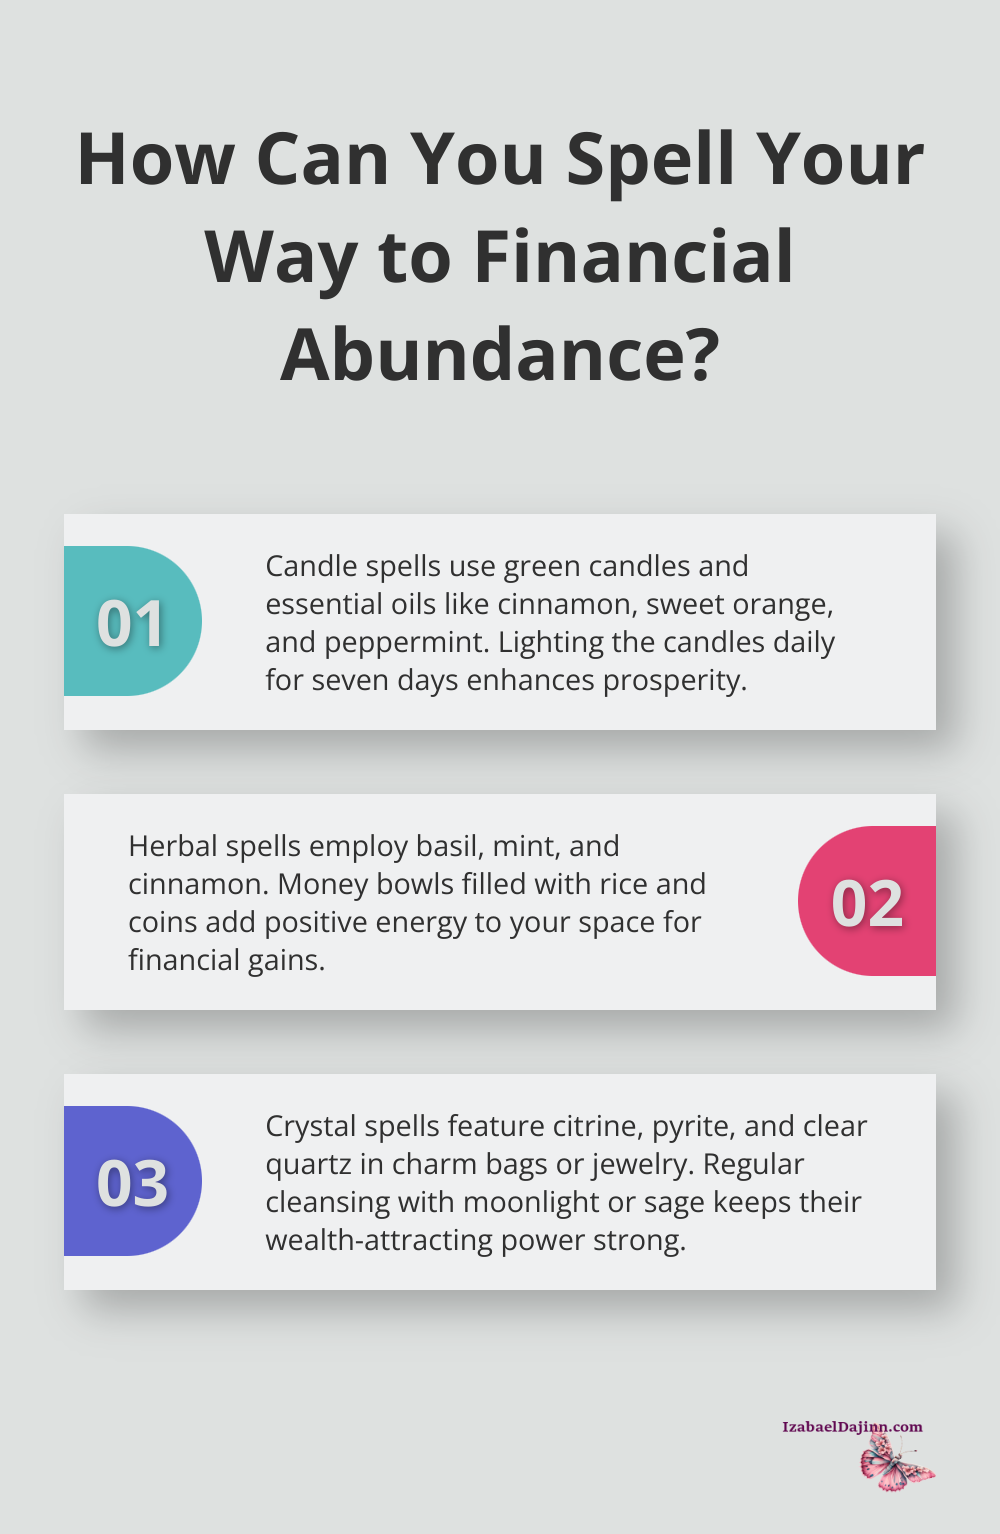 Fact - How Can You Spell Your Way to Financial Abundance?